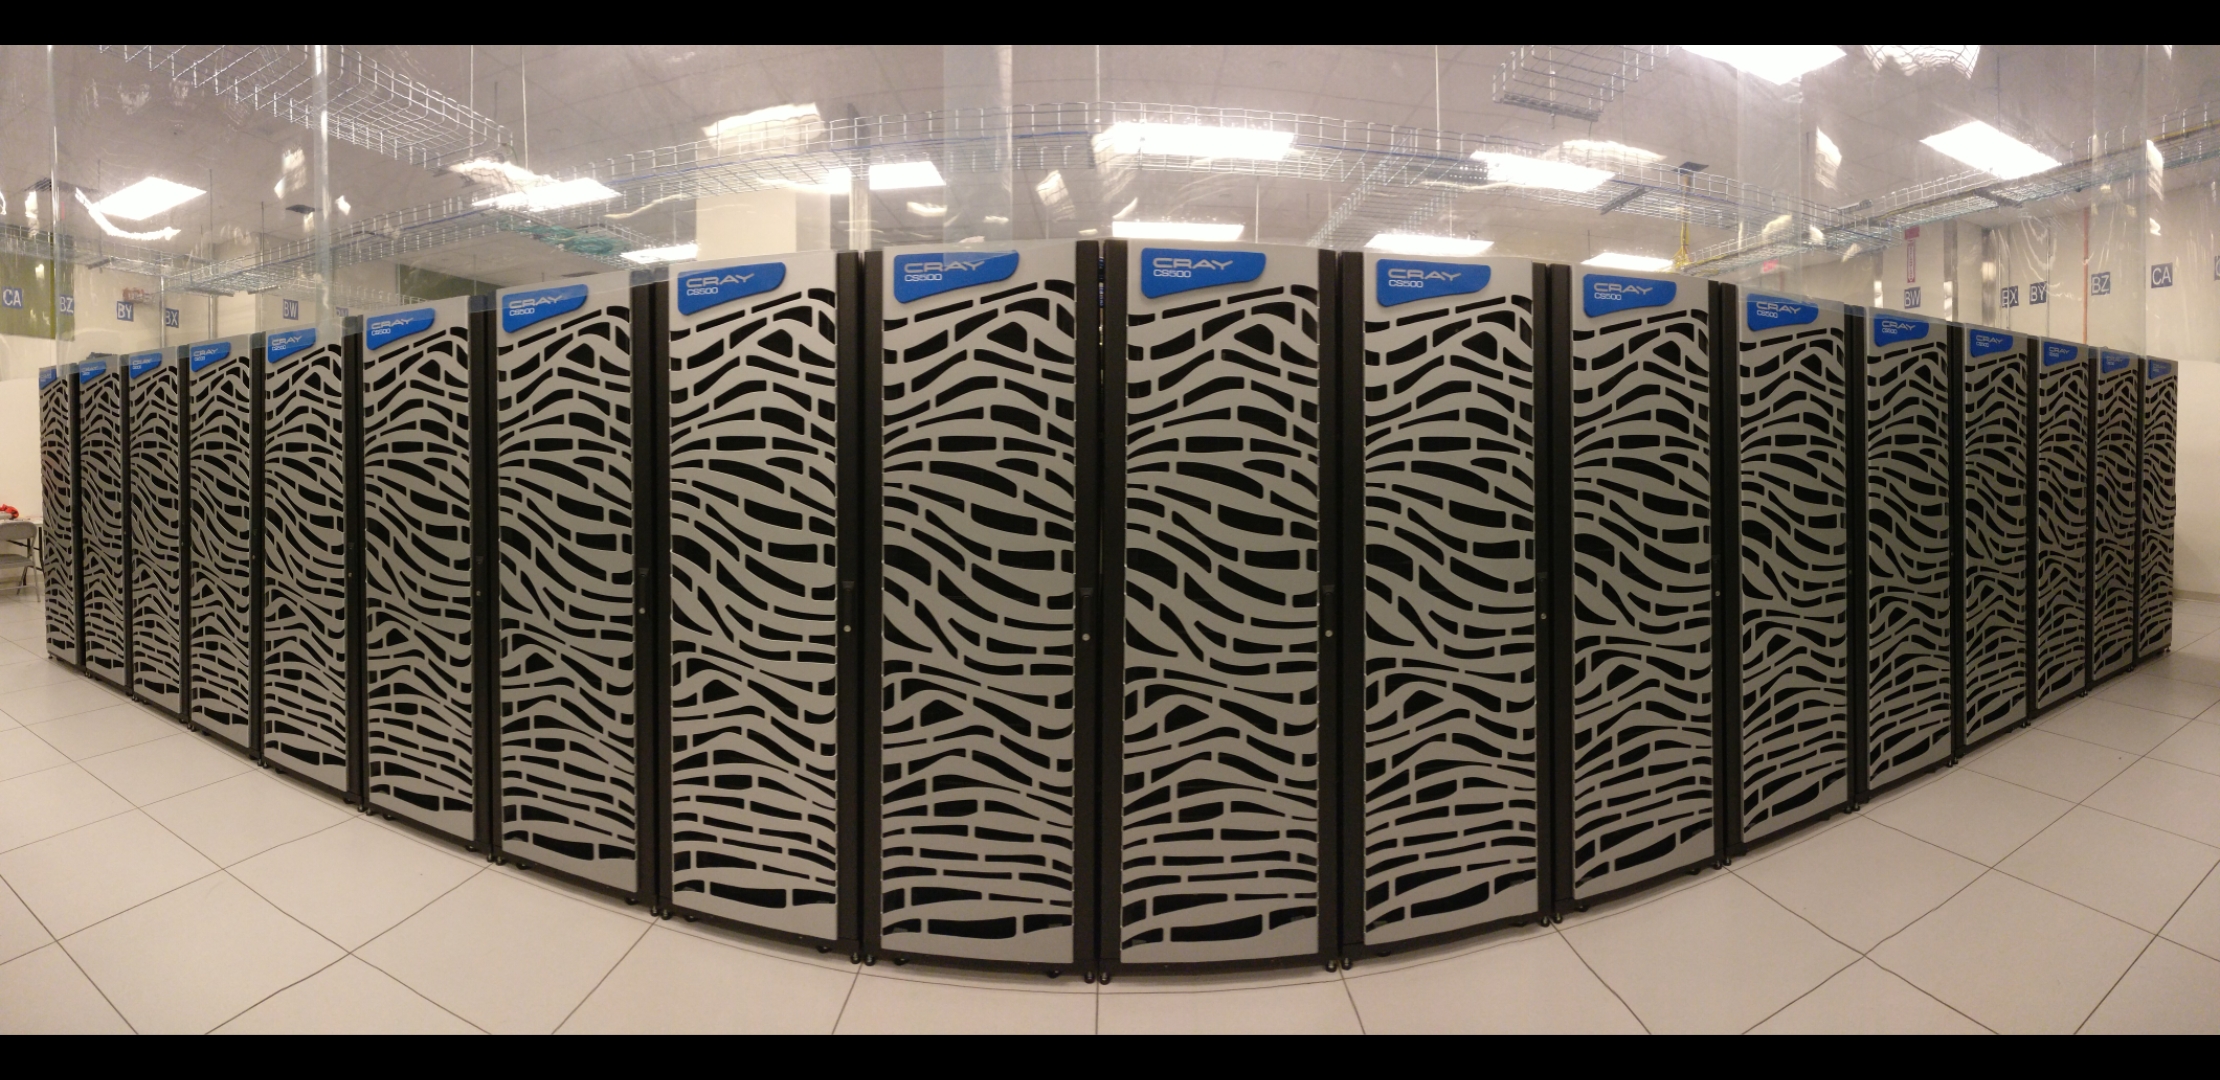 A view inside the Hera supercomputer site at NOAA’s facility in Fairmont, West Virginia